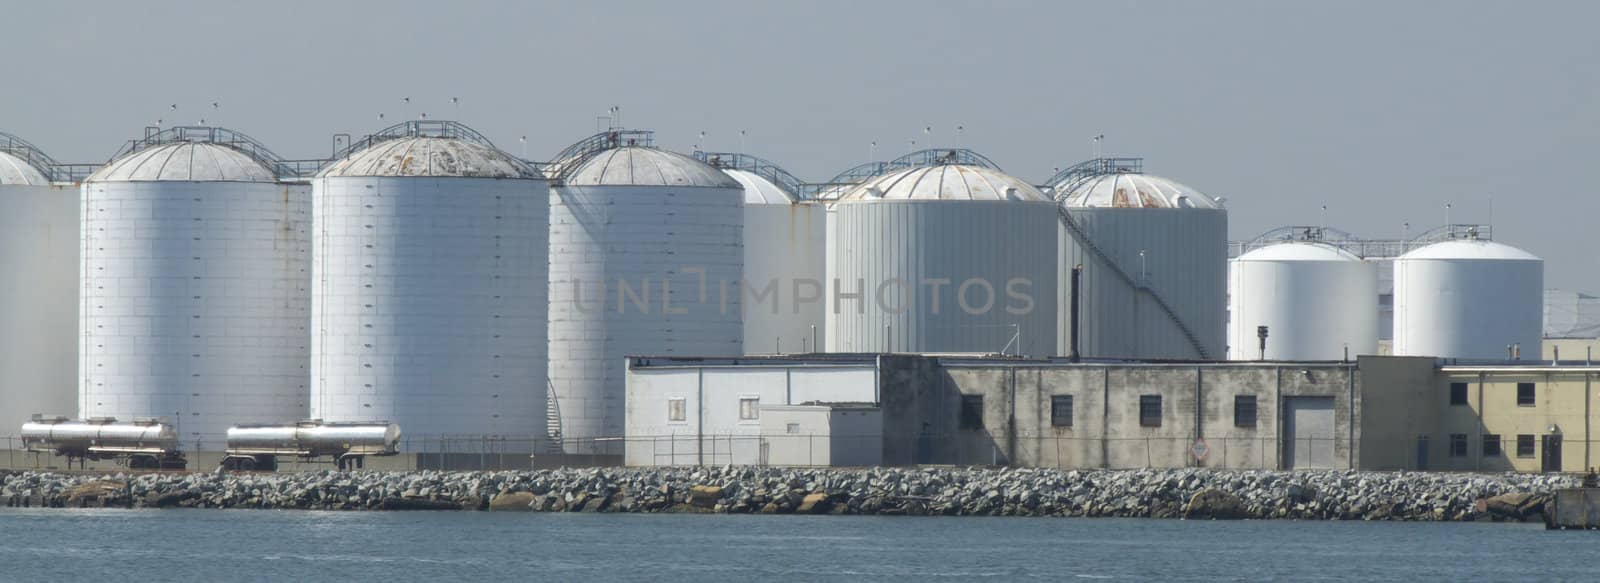 lots of big silos standing in the harbor